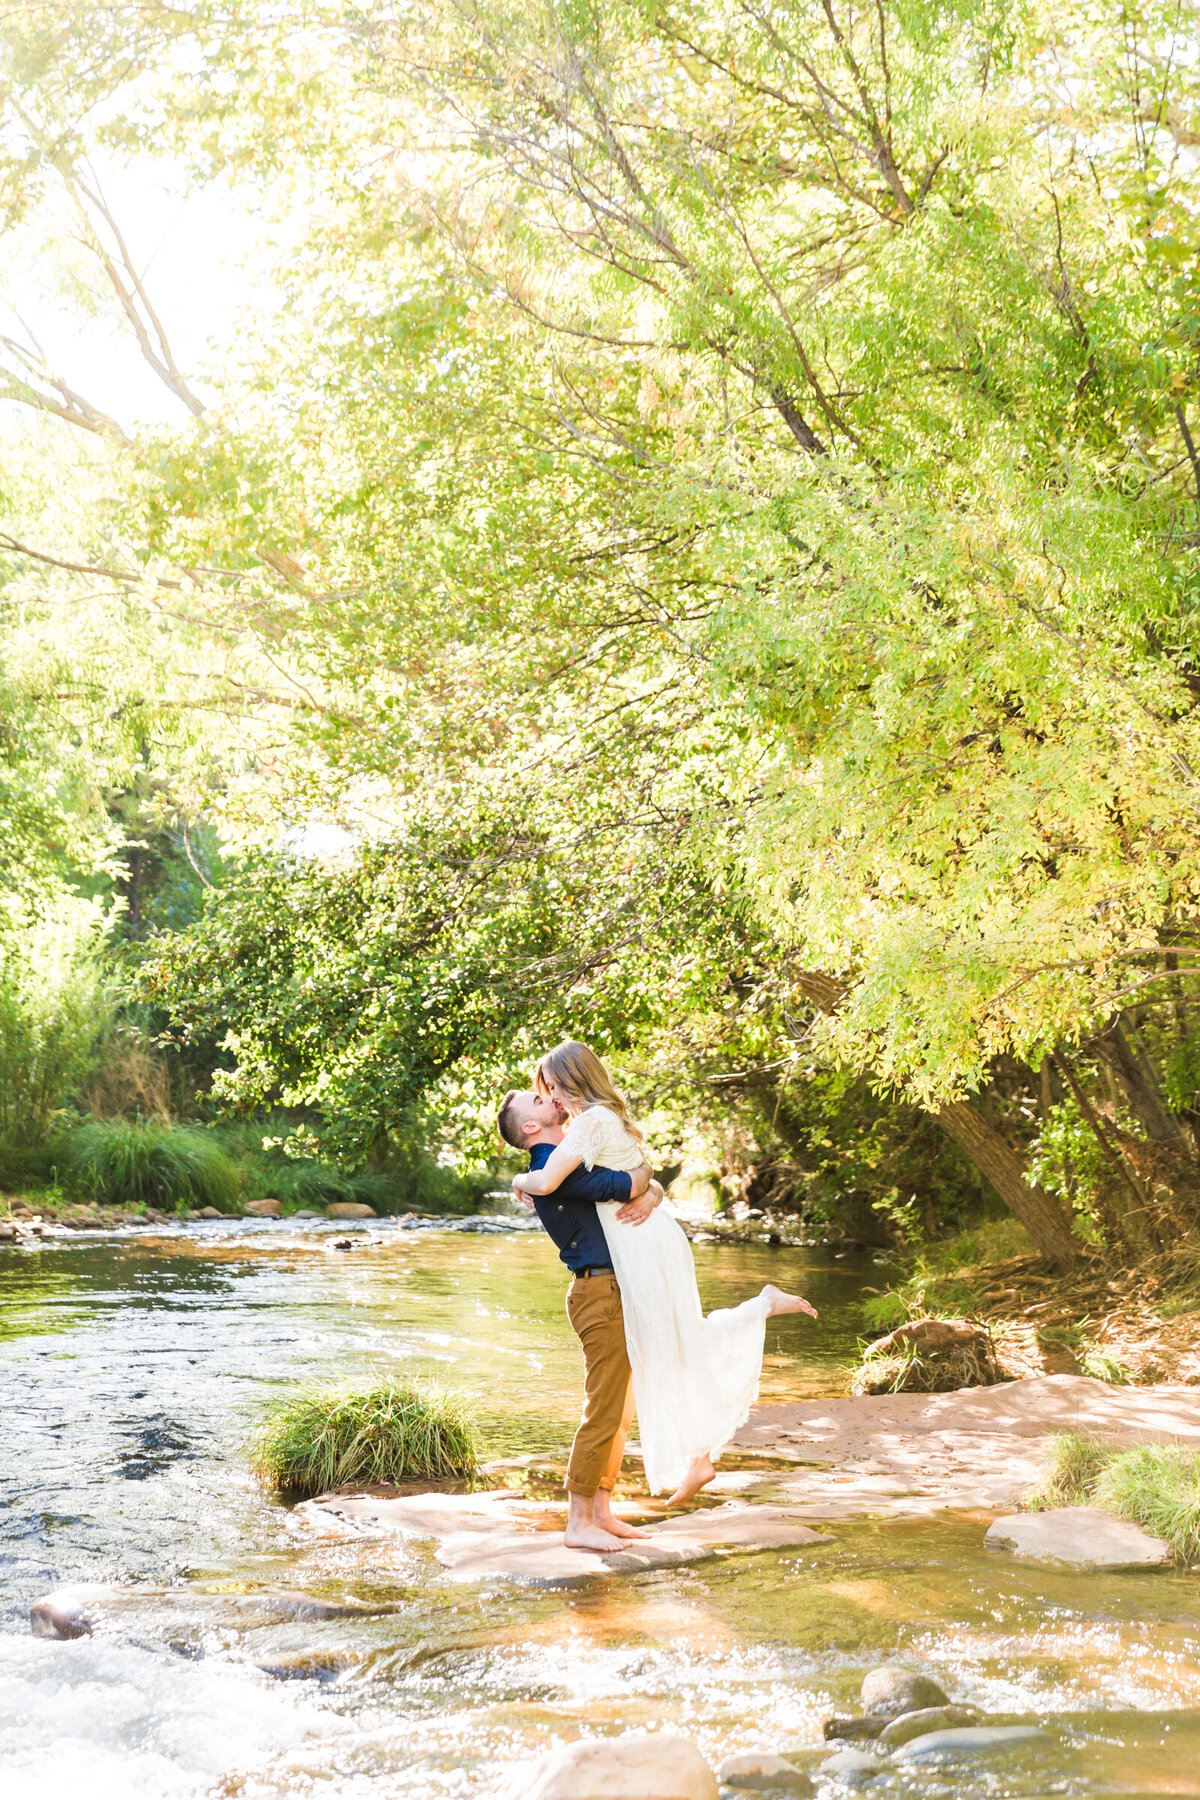 engaged couple posing together for engagement photo in Sedona creek